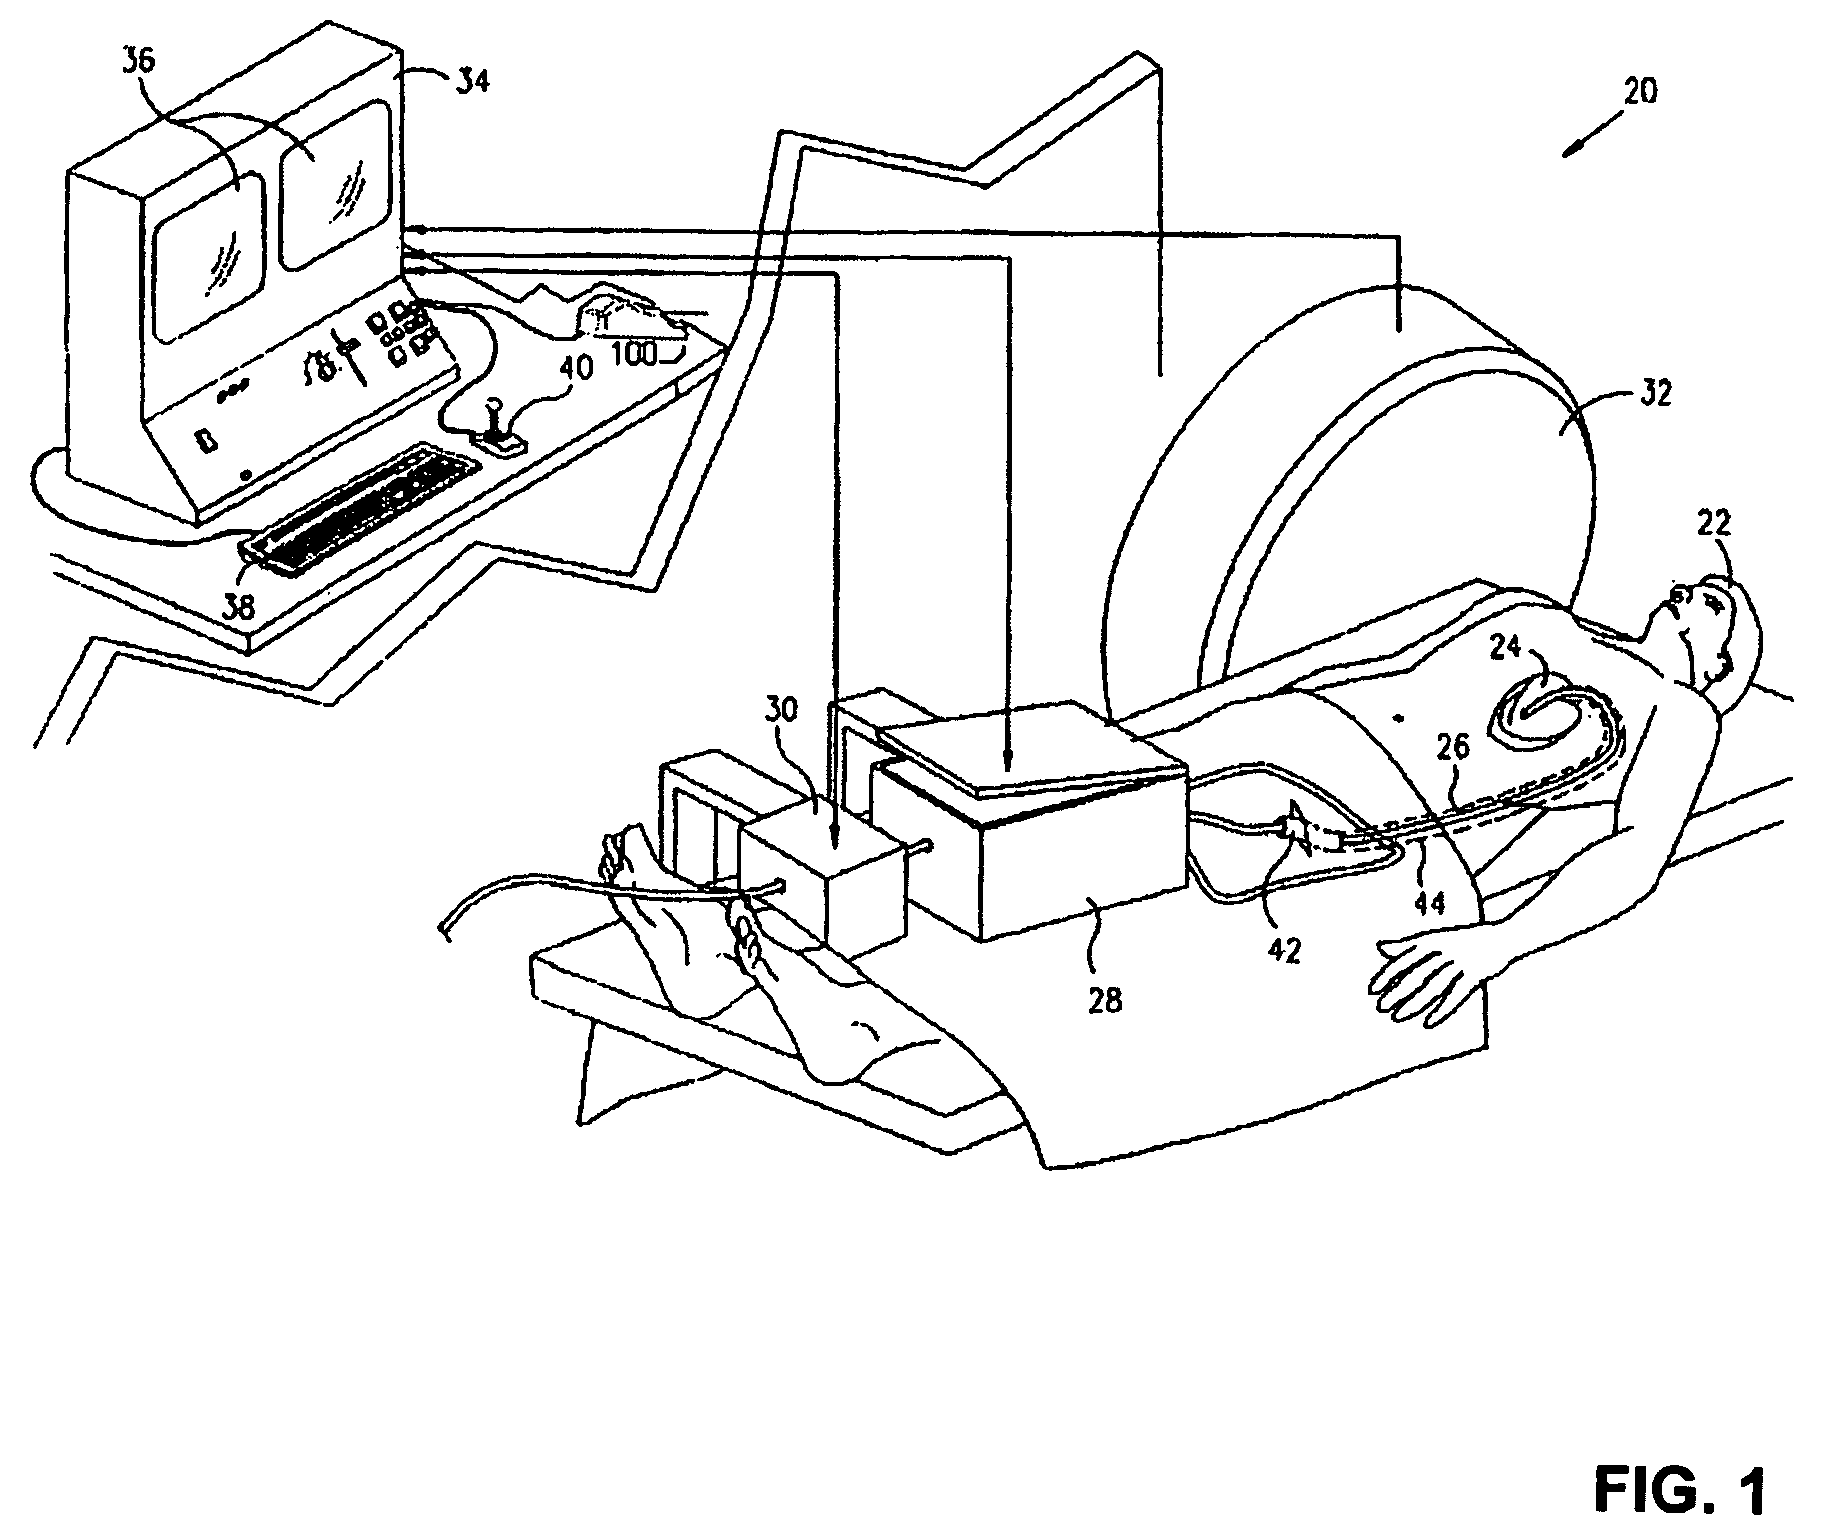 Transmission for a remote catheterization system